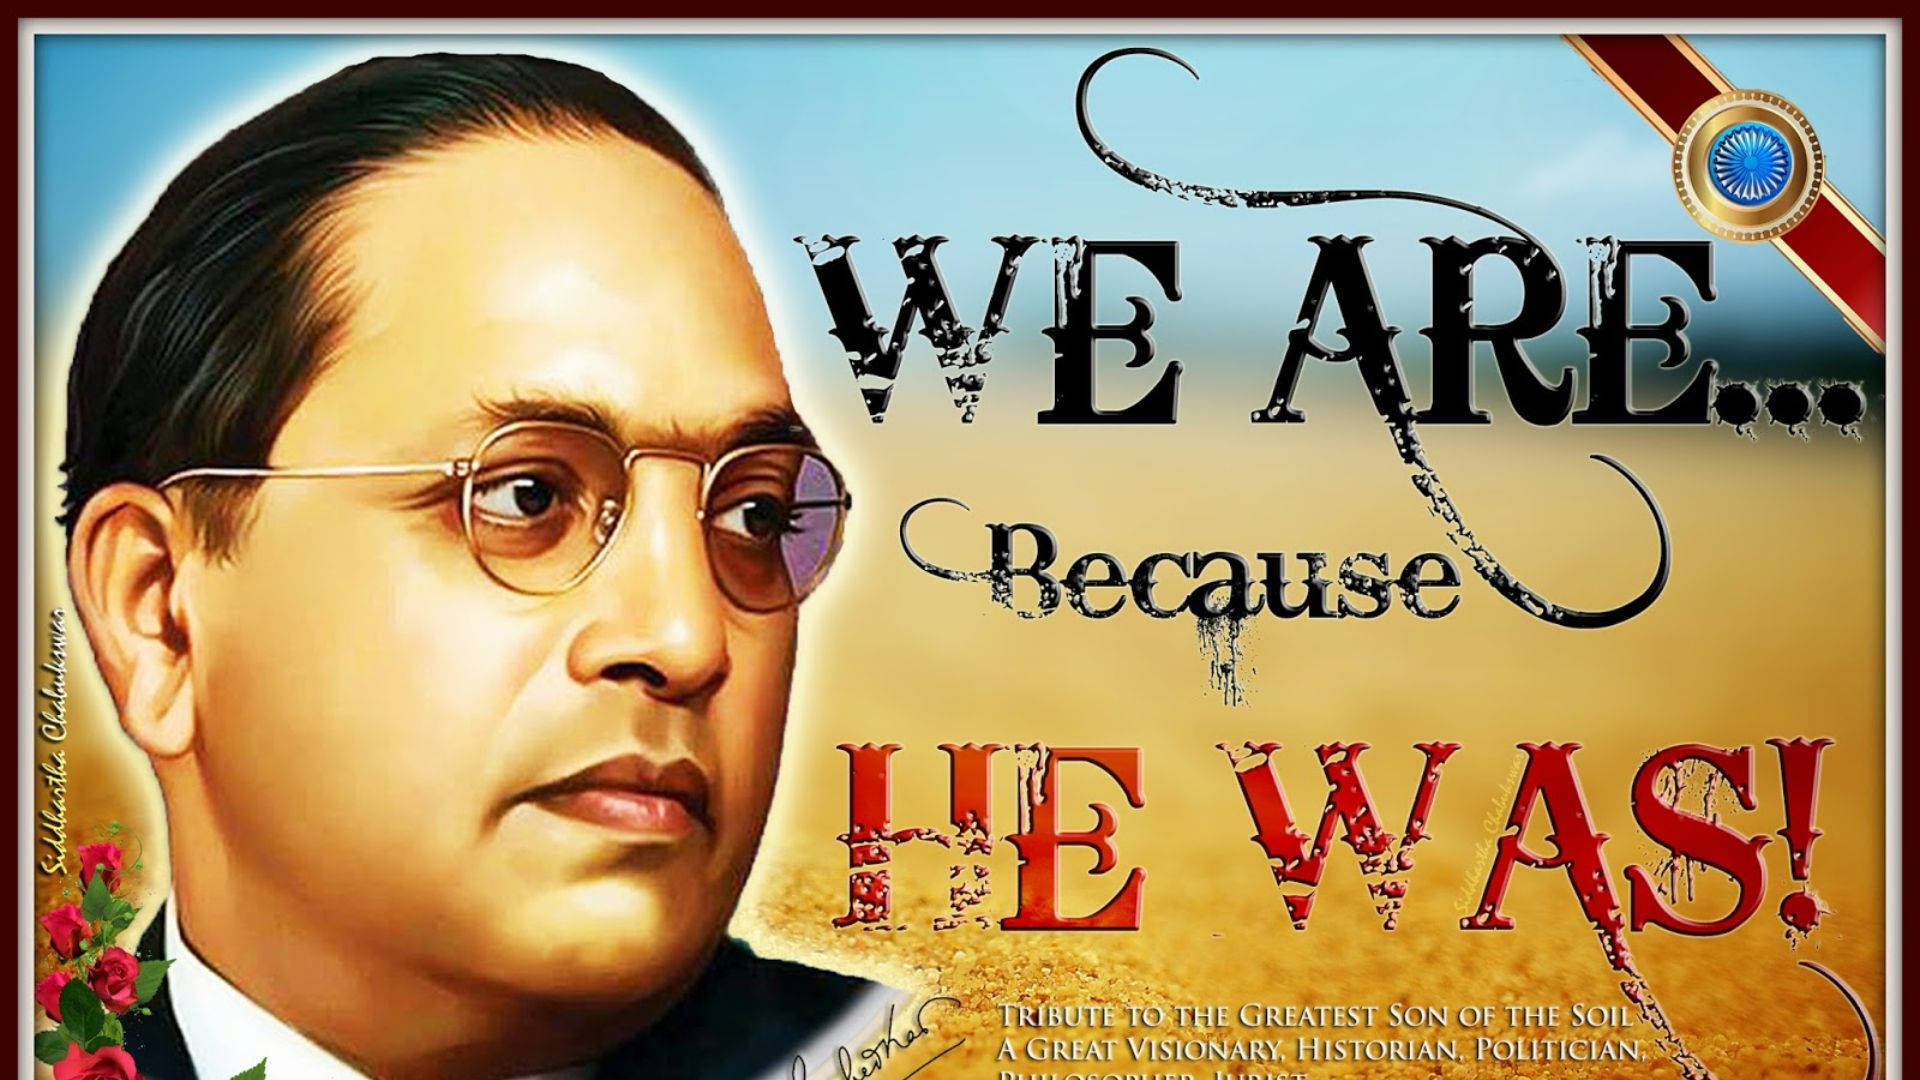 Quote By Ambedkar 4k Background